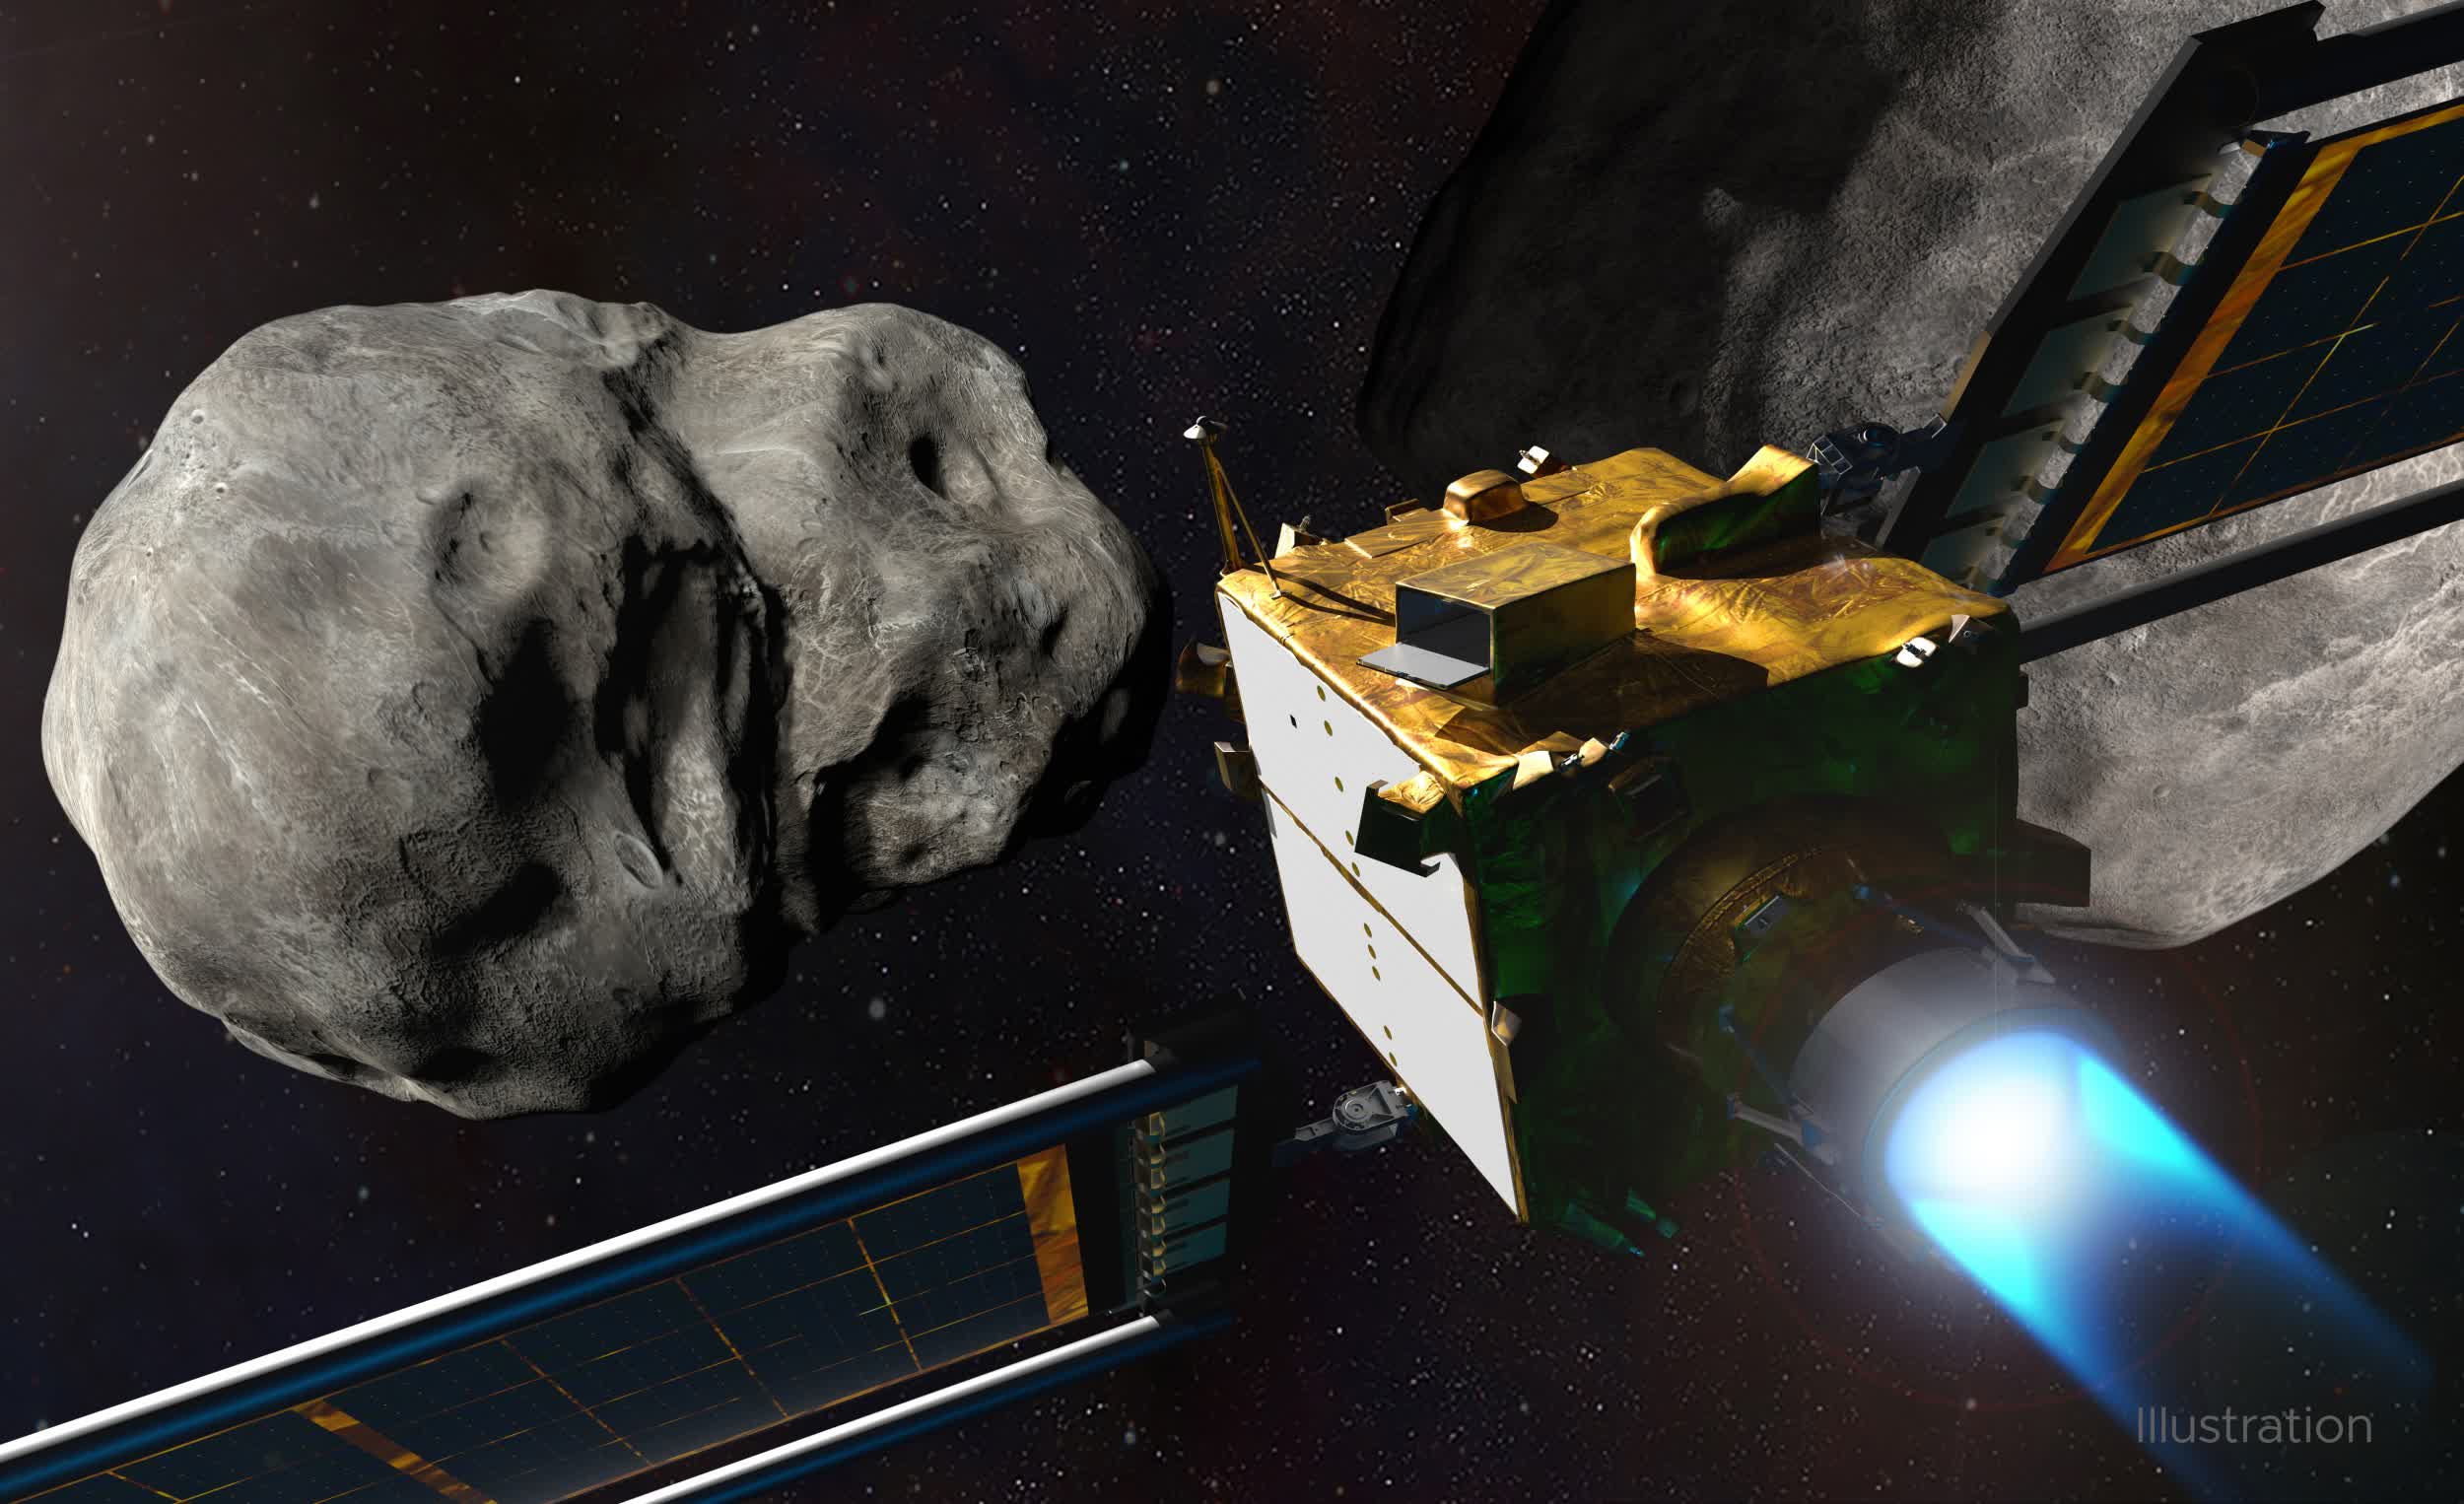 Watch NASA hit an asteroid with a spacecraft as it happened